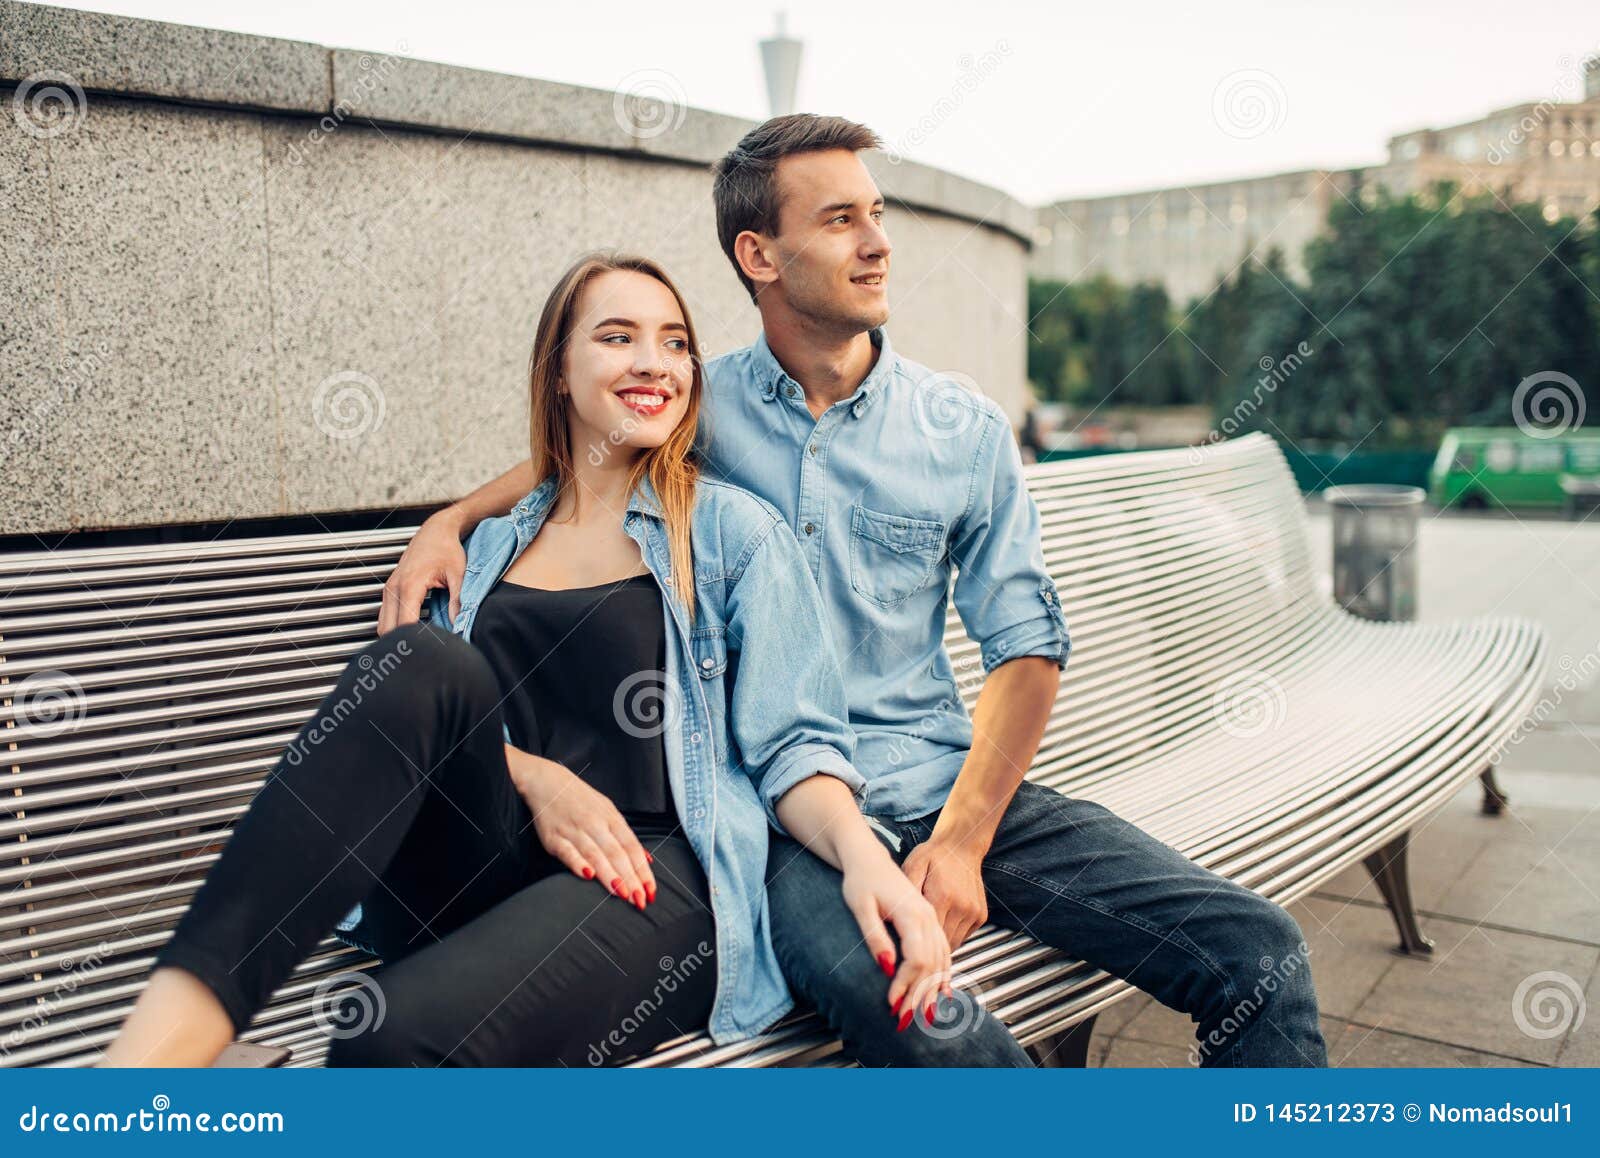 Love story of indian couple posed outdoor, sitting on bench together. Stock  Photo by ASphotostudio